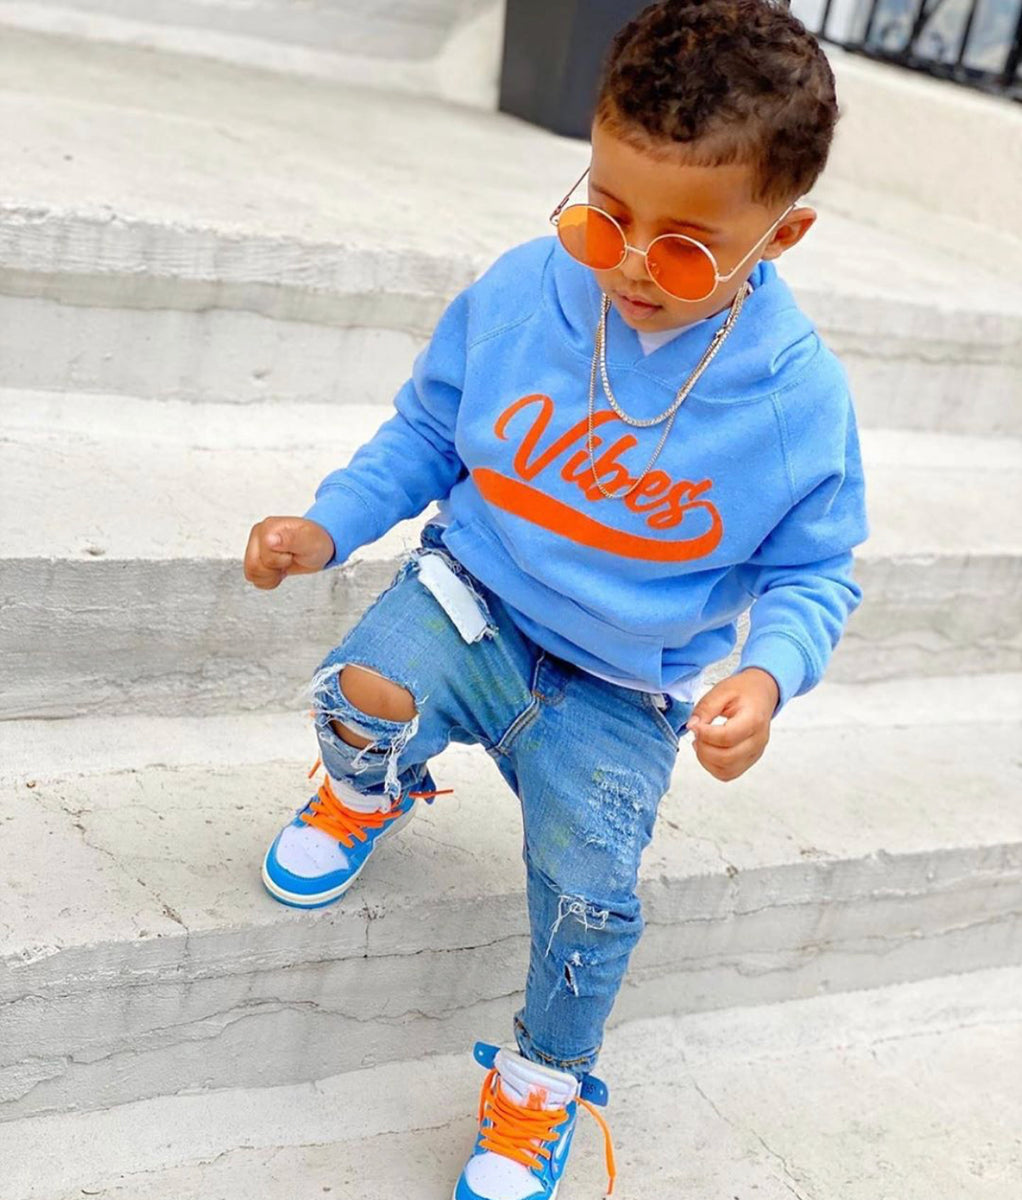 baby boy swag pictures